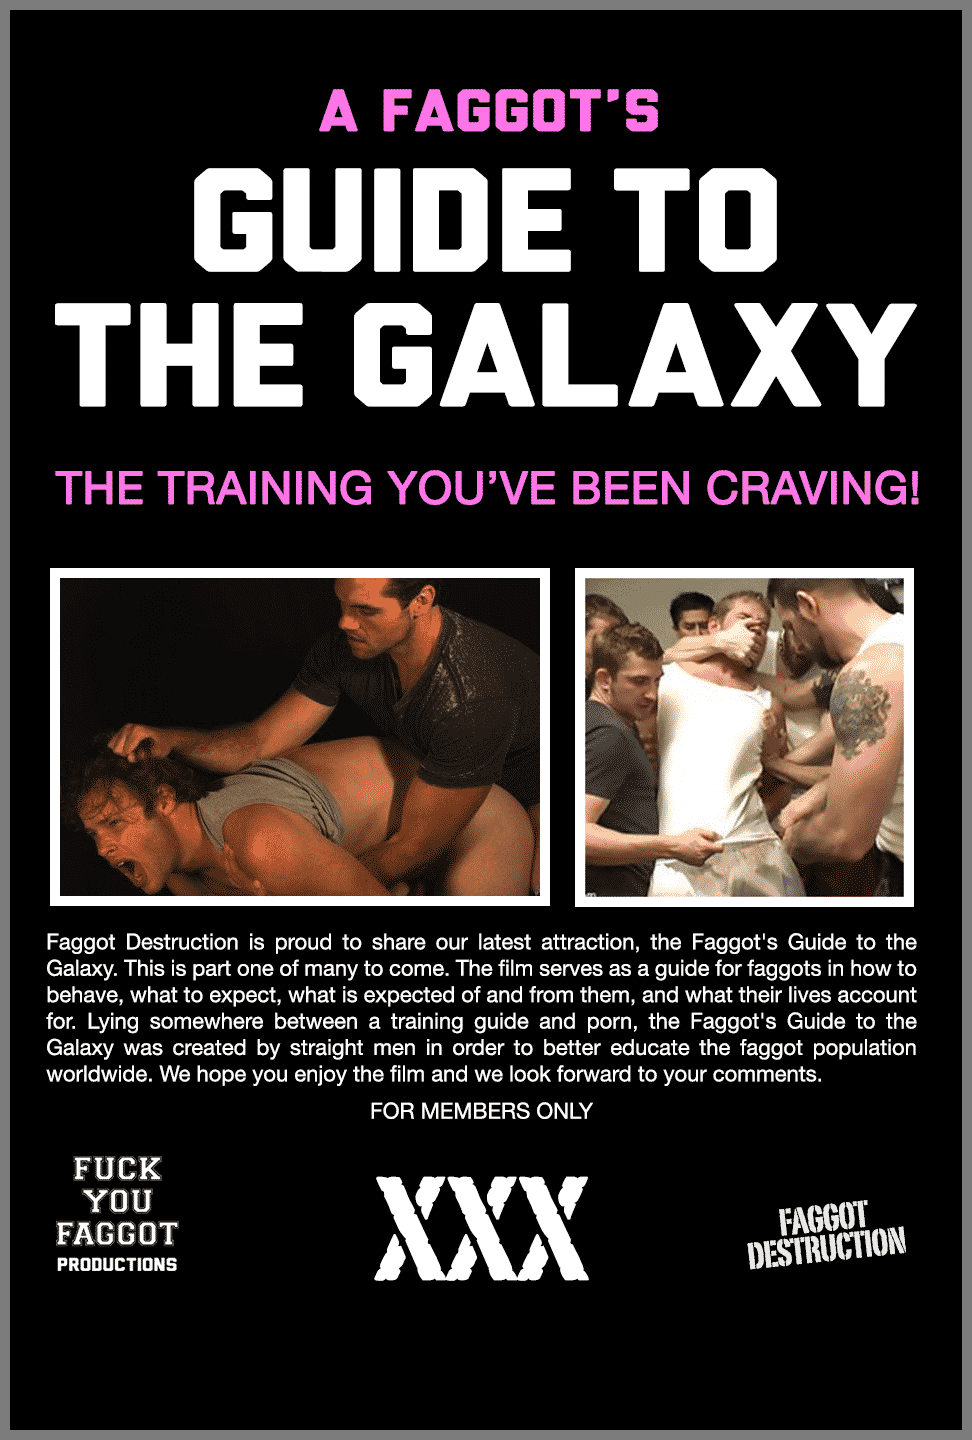 Banned by Vimeo: A Faggot’s Guide to the Galaxy